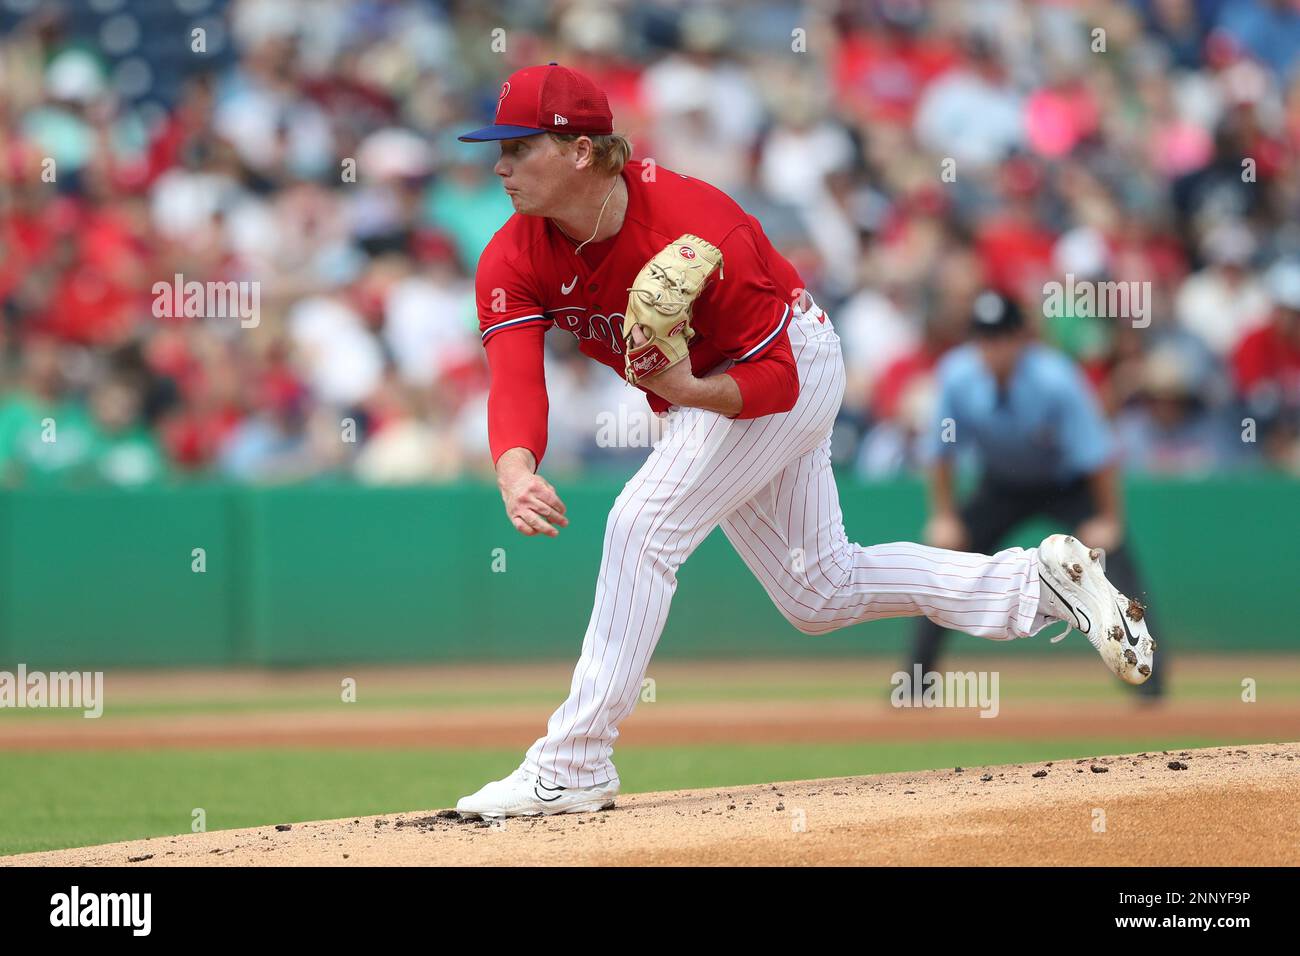 CLEARWATER, FL - FEBRUARY 25: Philadelphia Phillies Pitcher Nick Nelson  (57) delivers a pitch to the plate during the spring training game between  the New York Yankees and the Philadelphia Phillies on